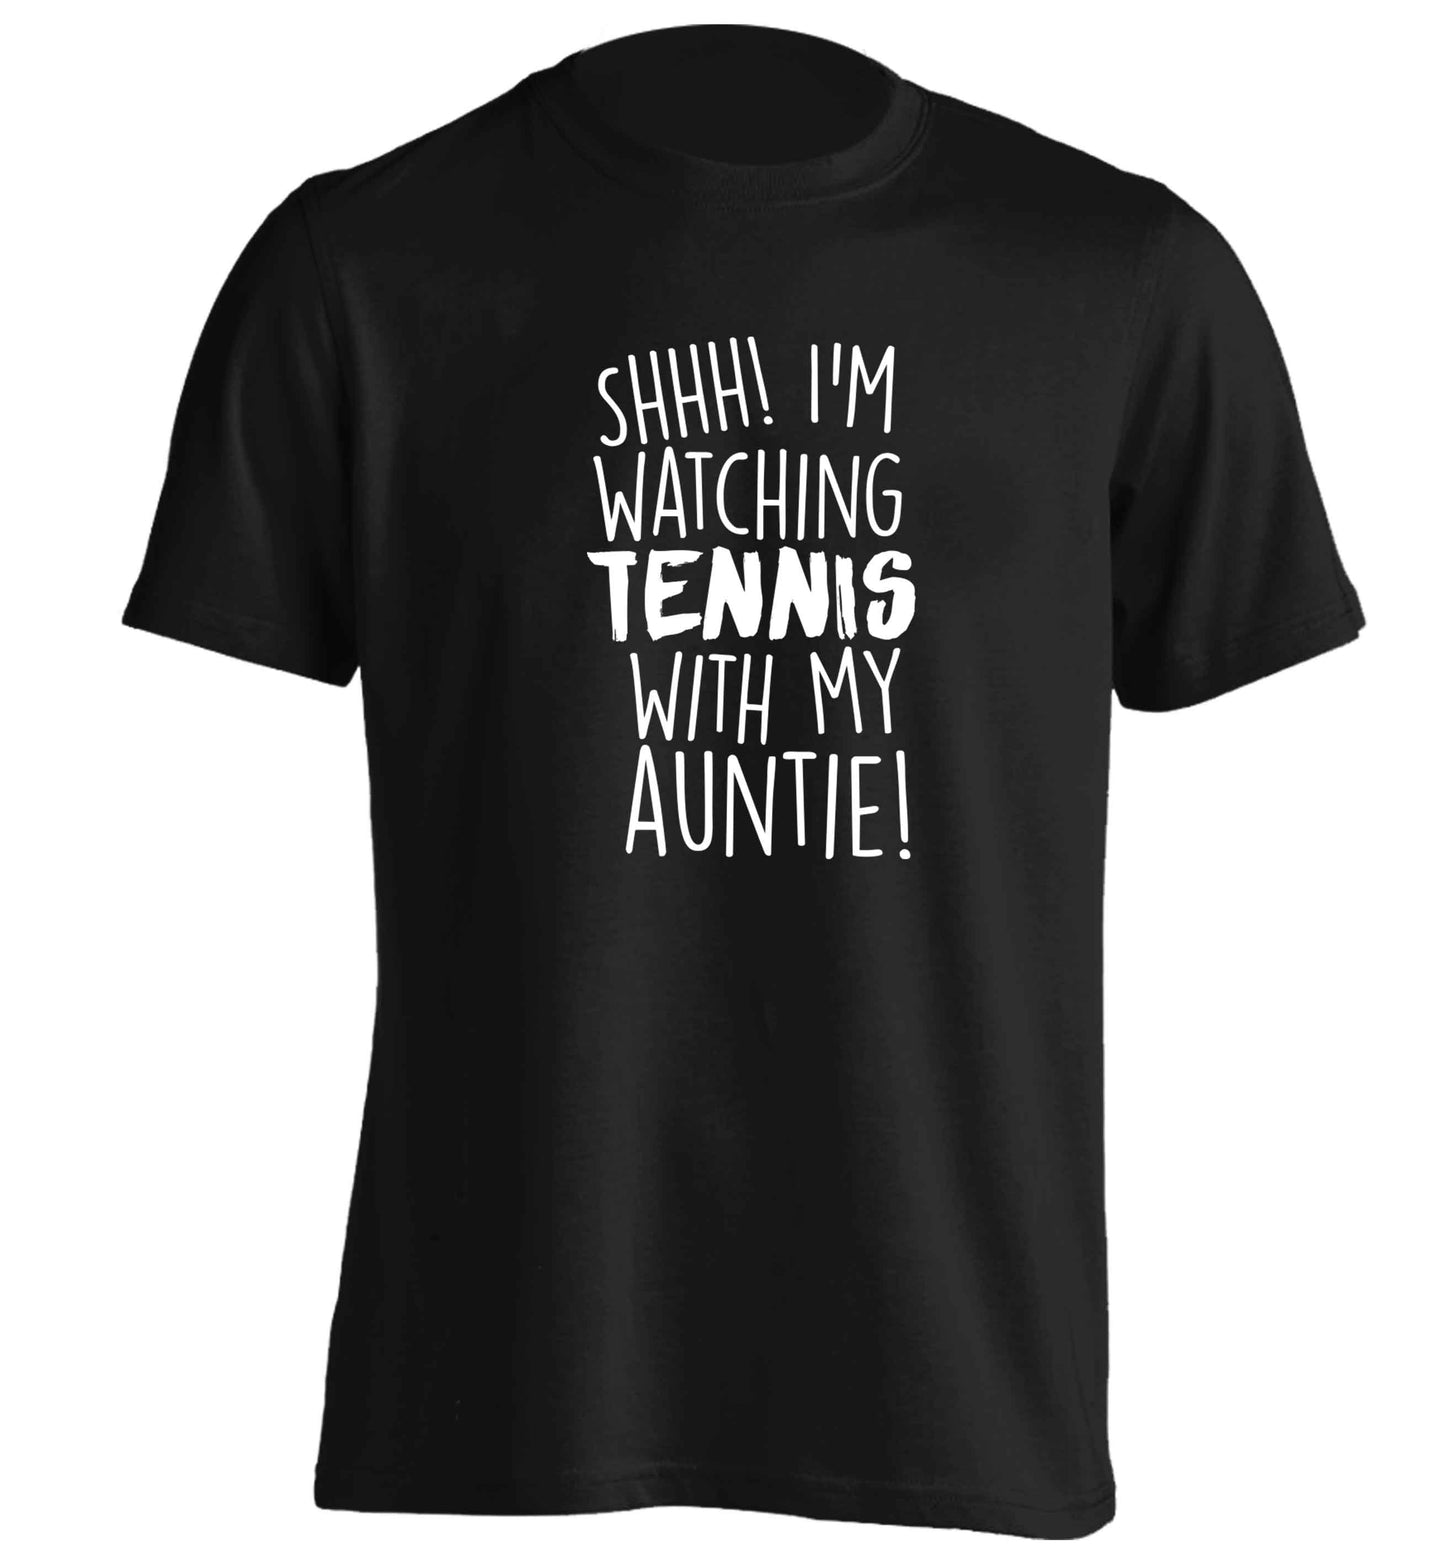 Shh! I'm watching tennis with my auntie! adults unisex black Tshirt 2XL